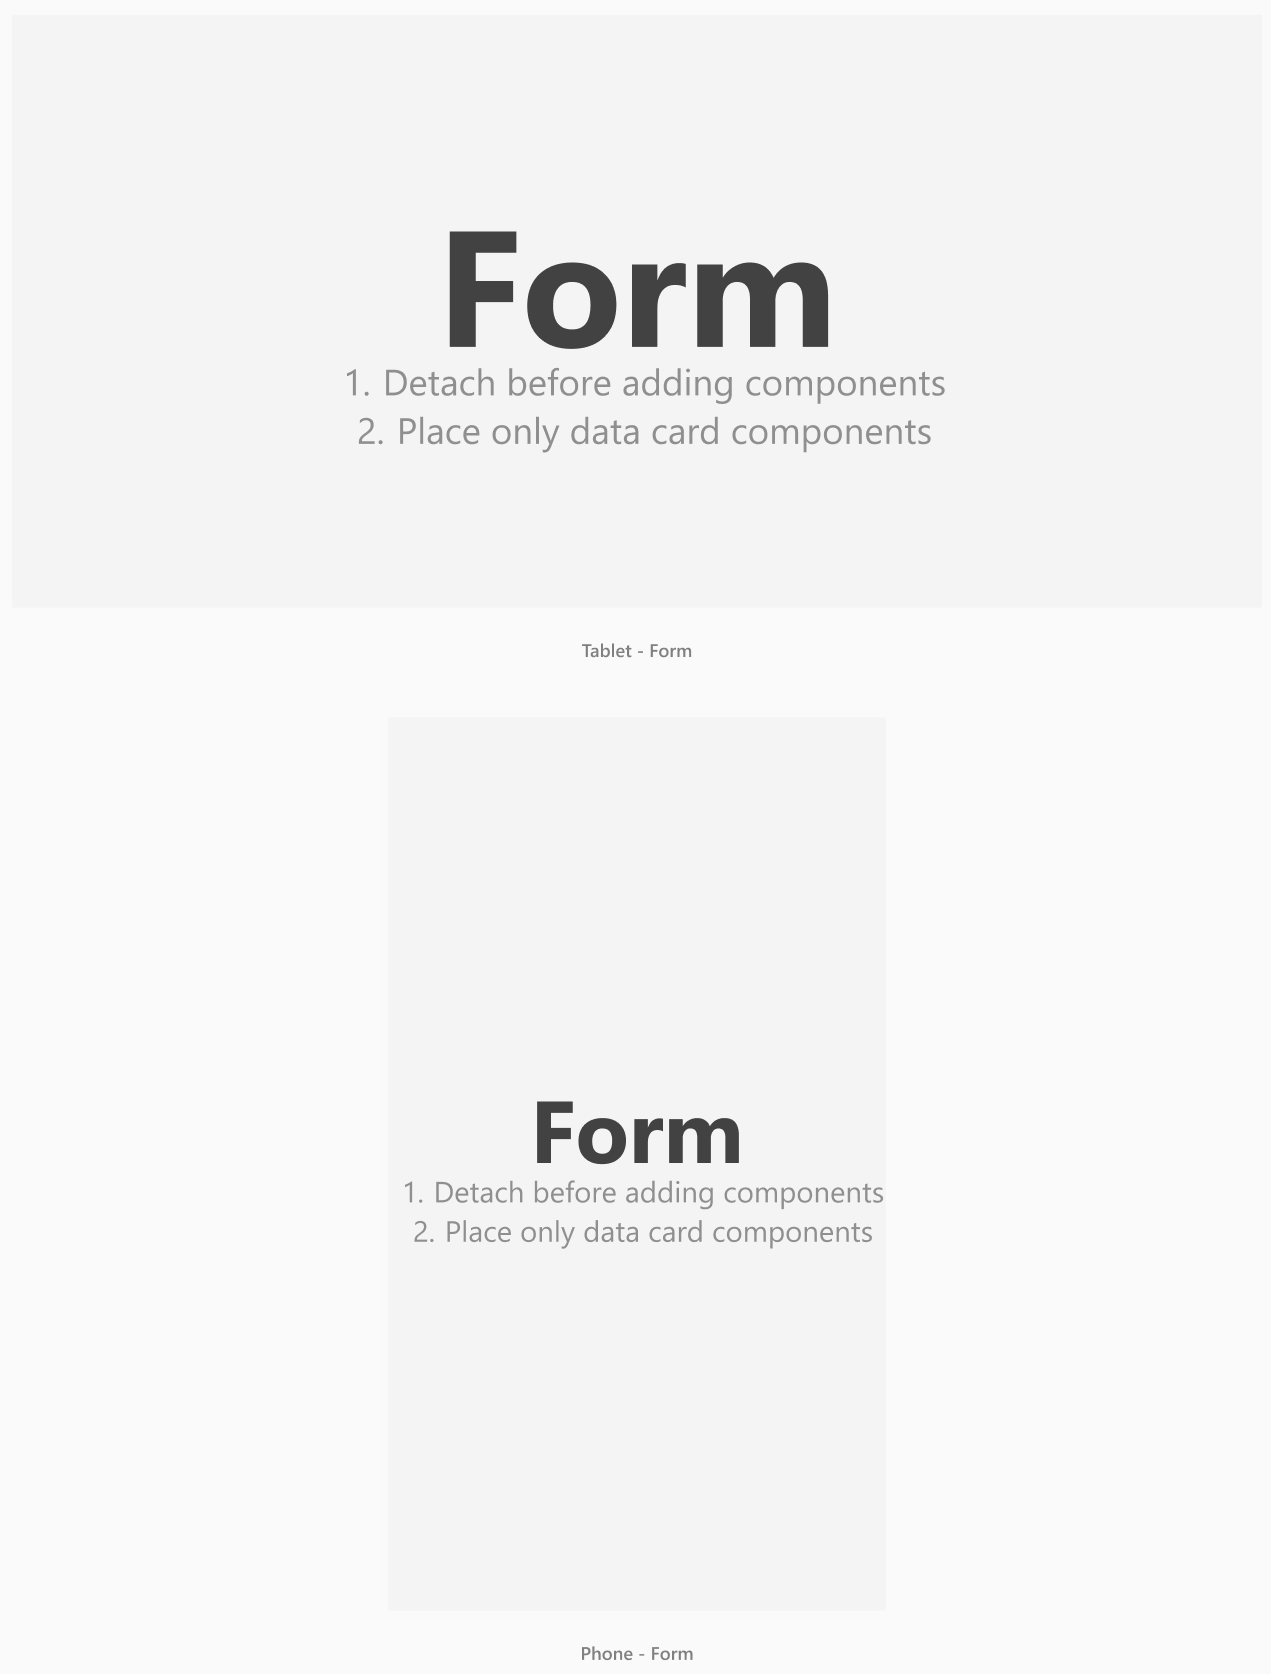 Form screen in the tablet and phone layout formats.